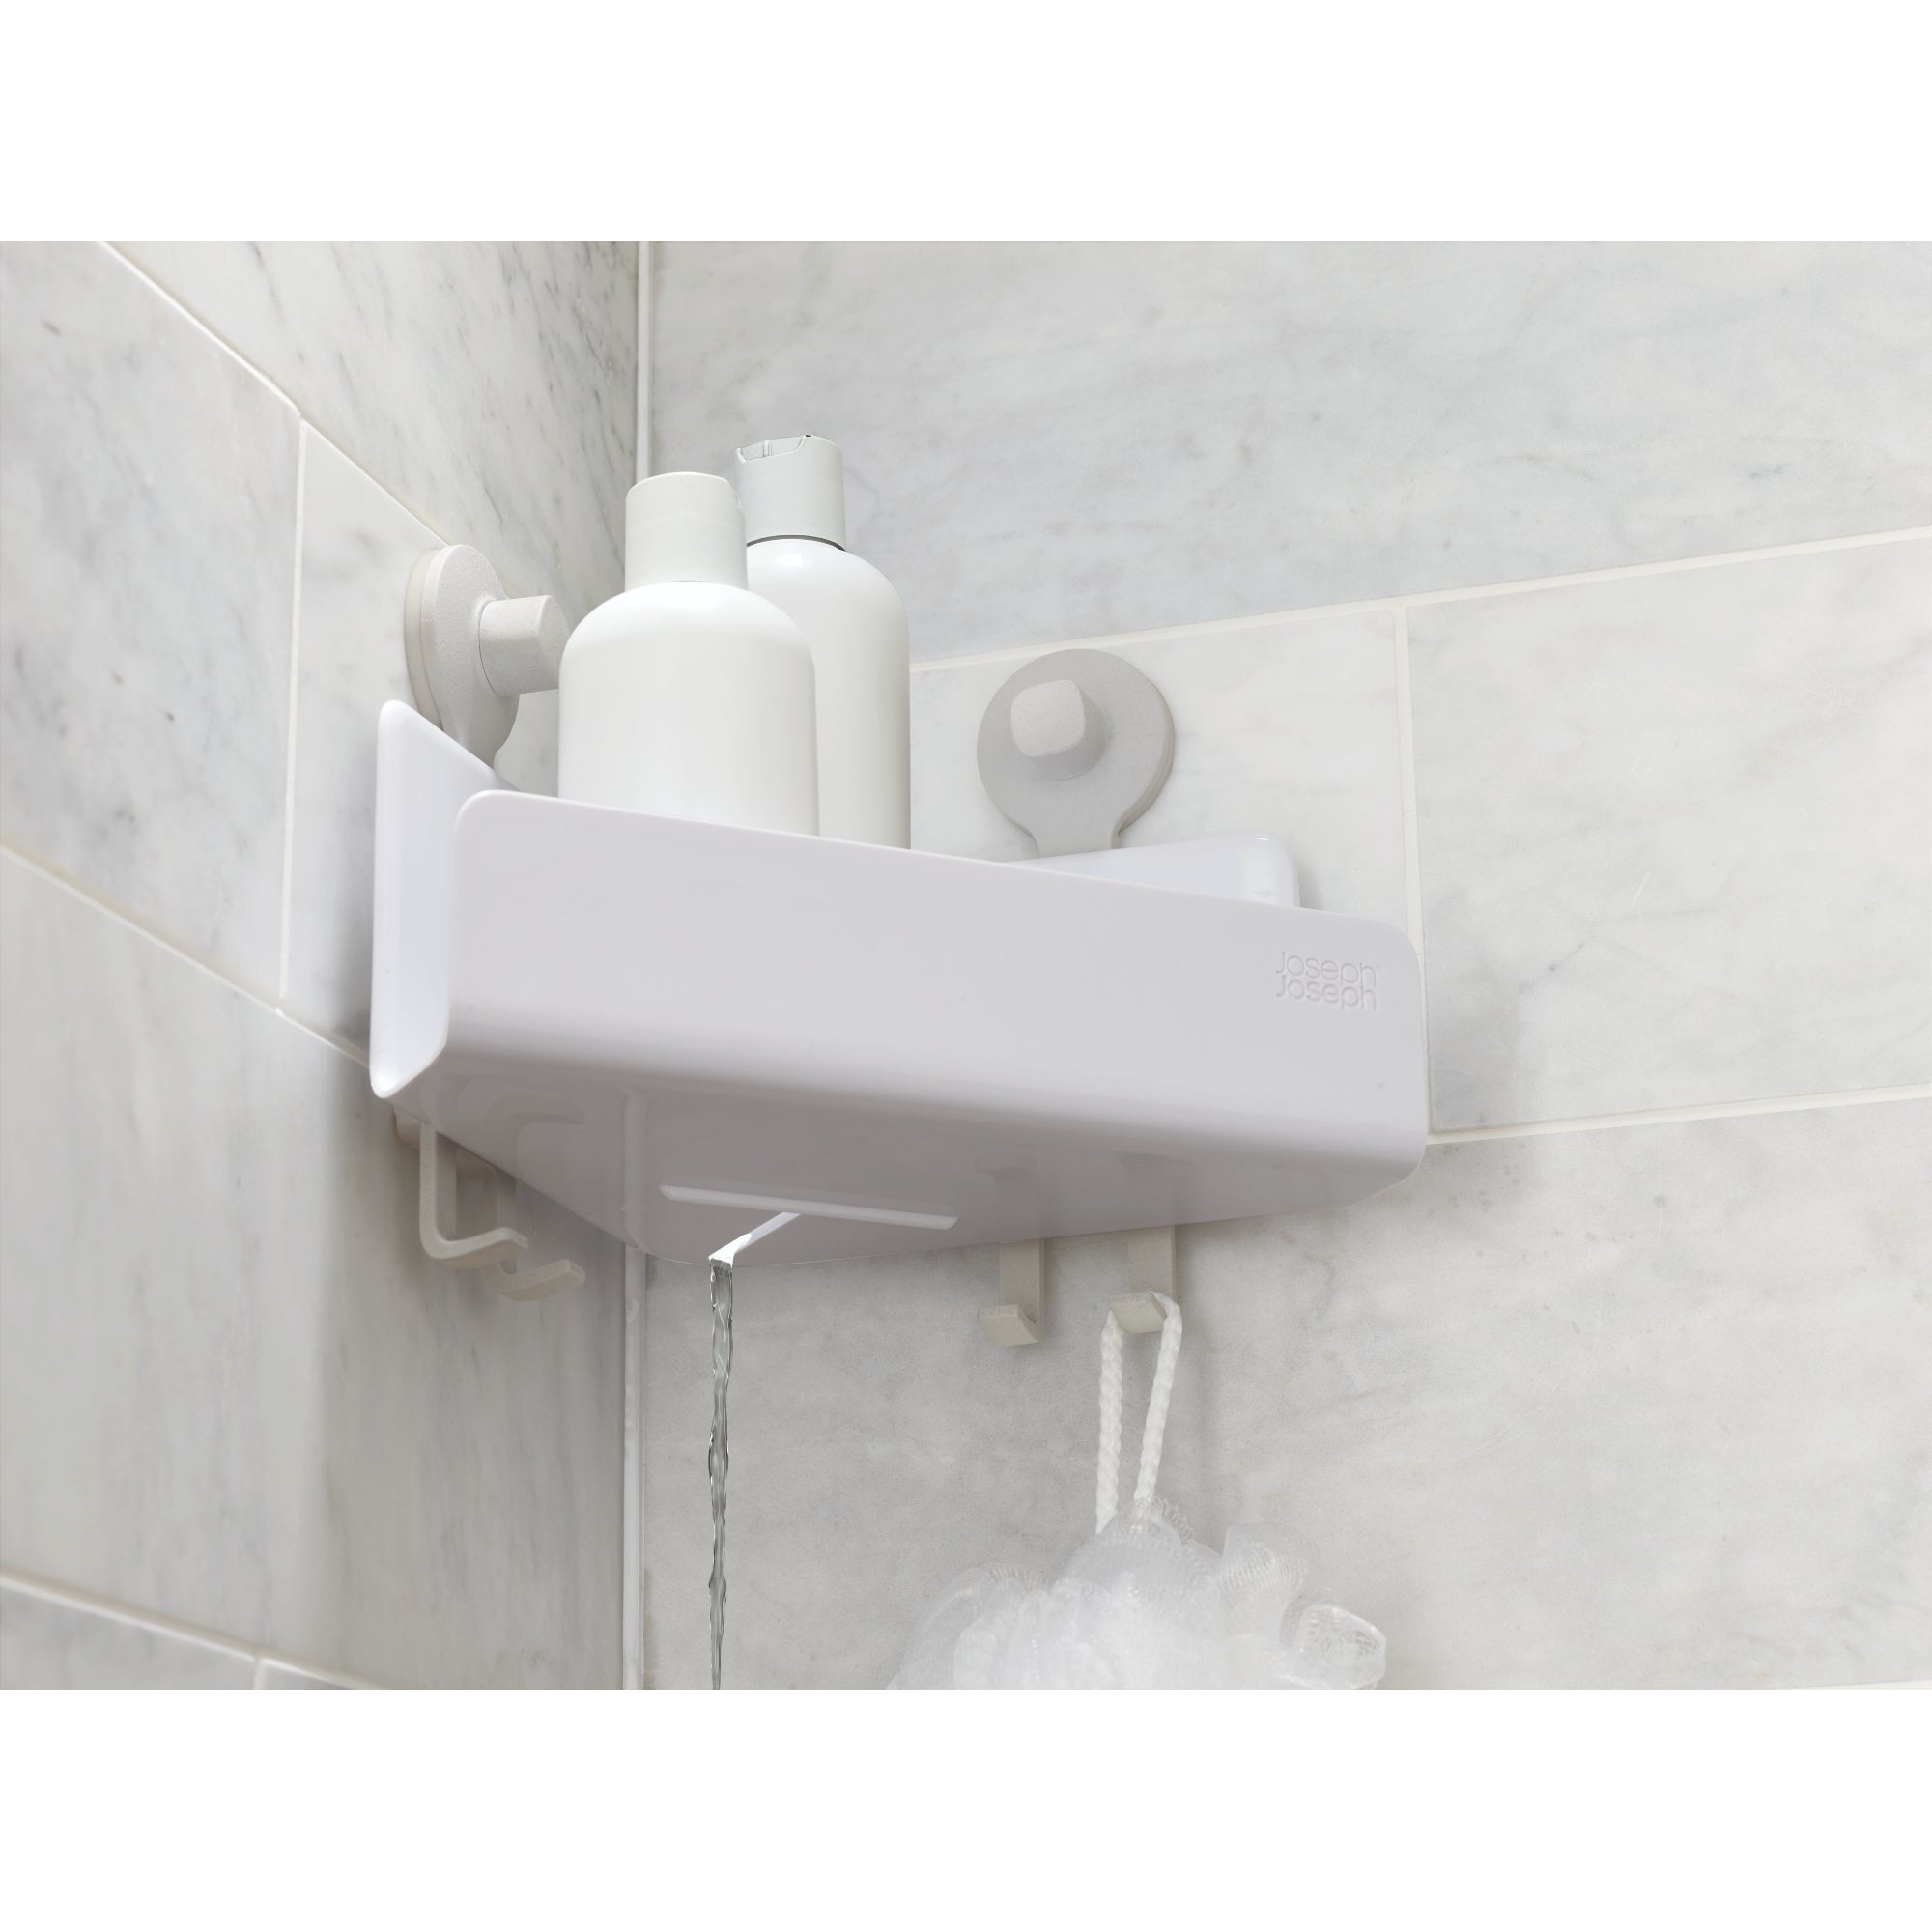 (Set of 2) EasyStore Corner Shower Caddy - White